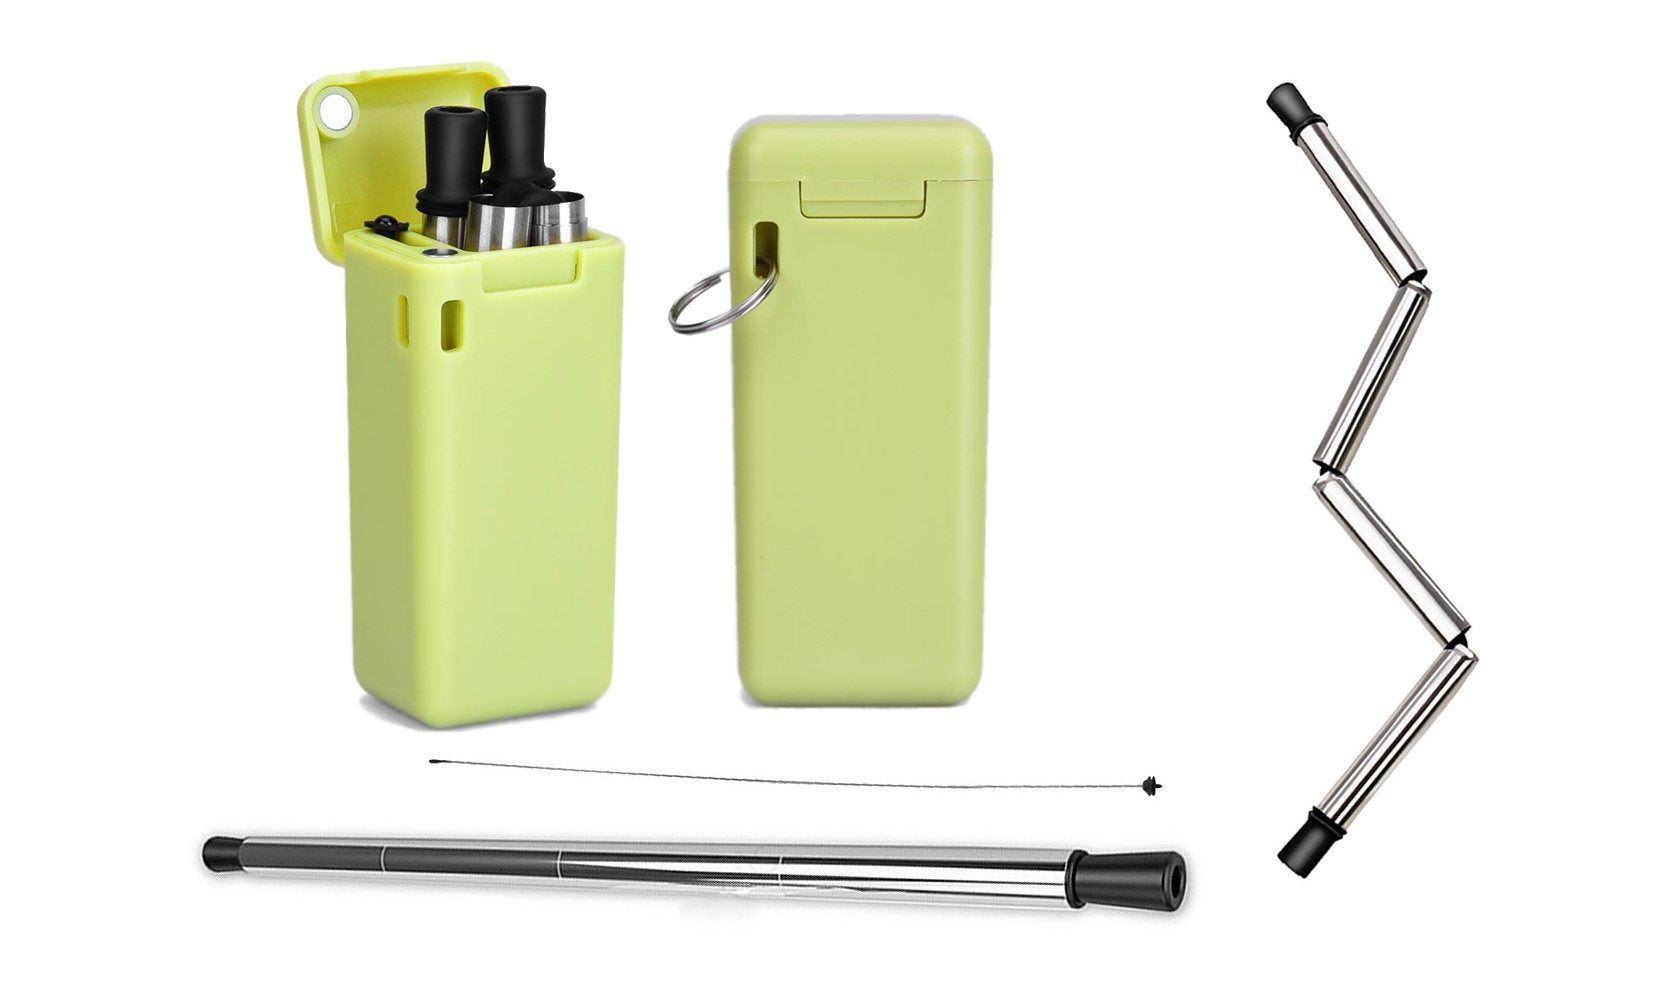 Collapsible, Portable, And Reusable Stainless Steel Drinking Straw With Case